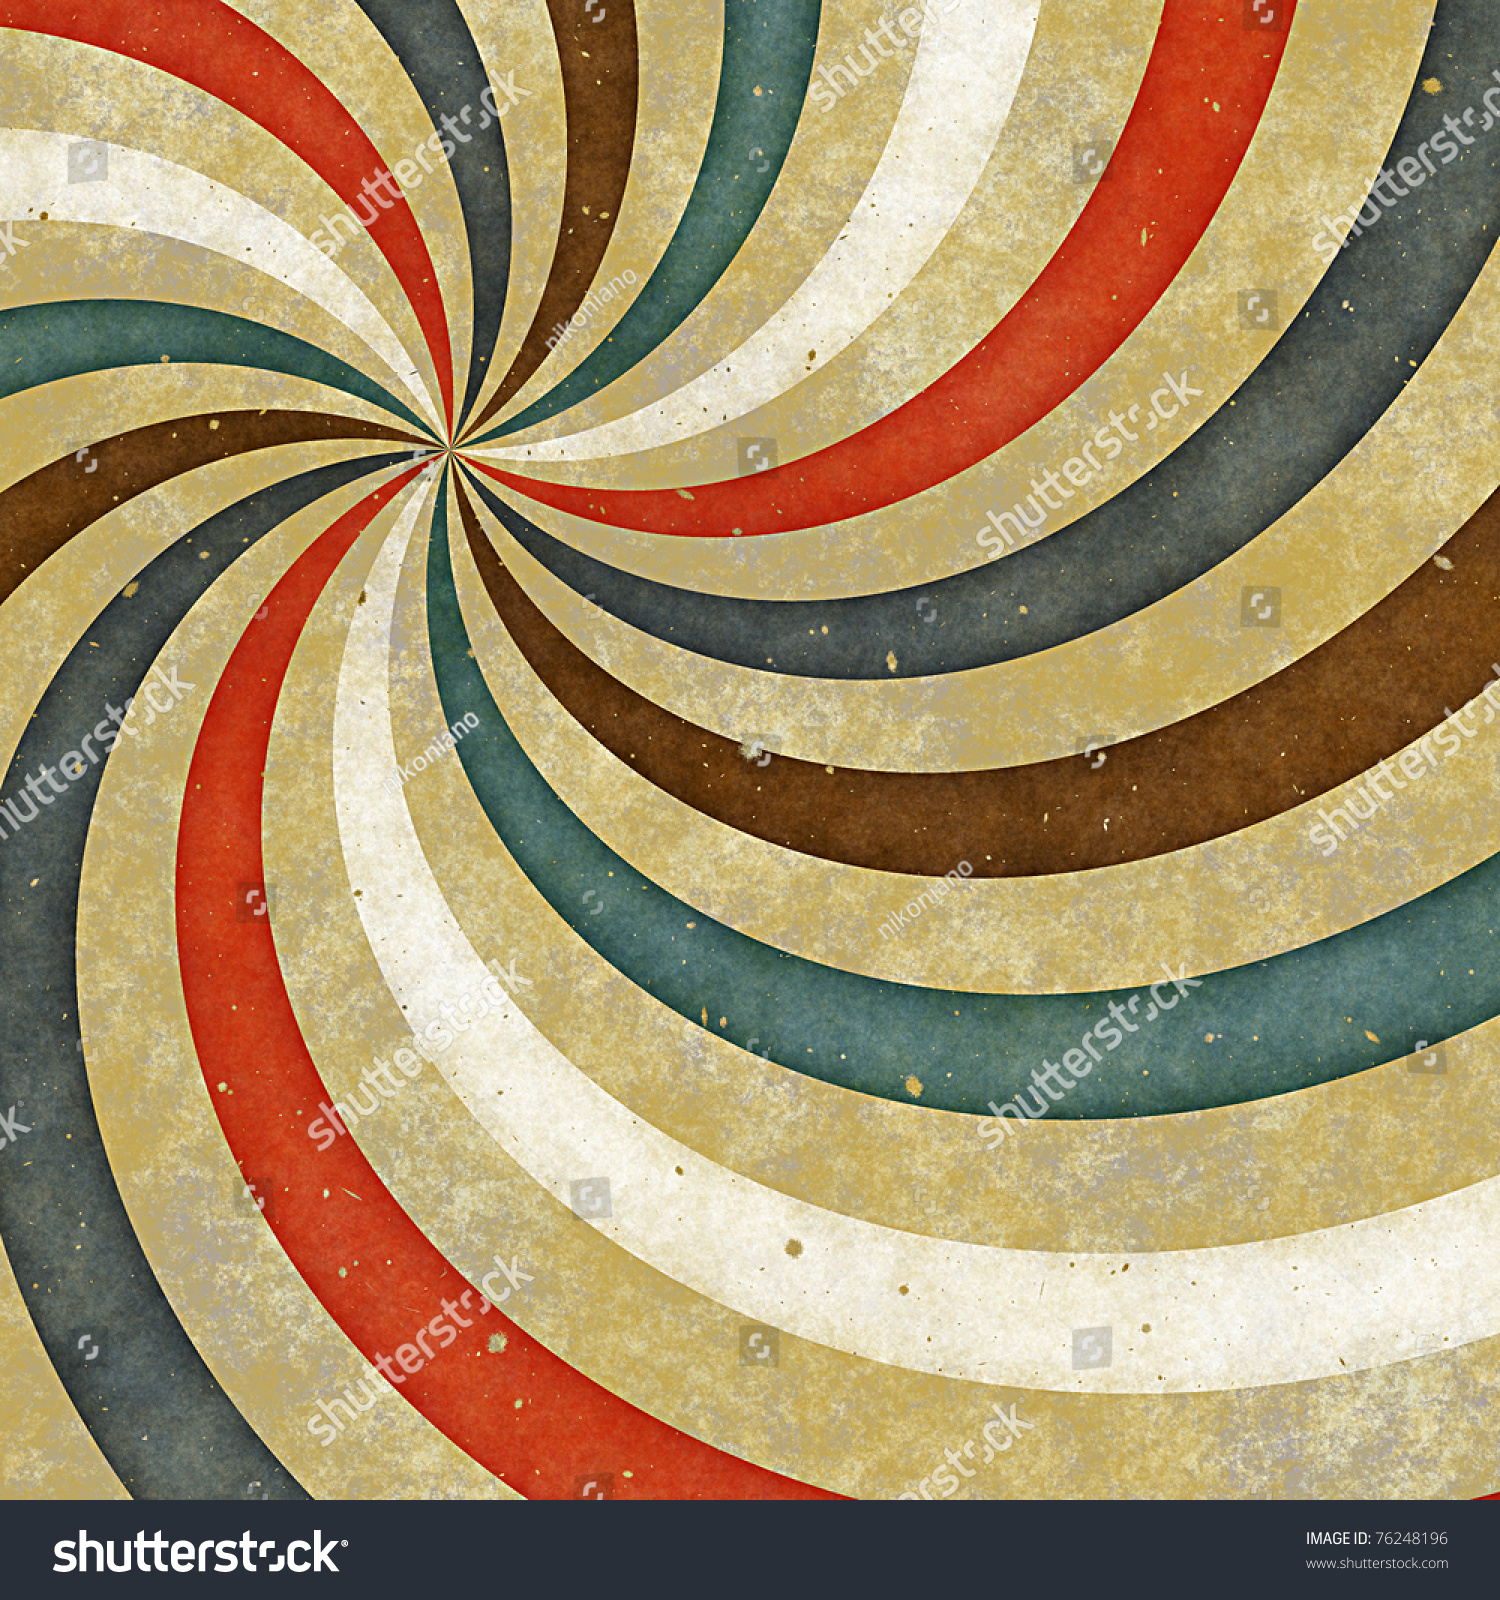 Abstract Vintage Background Stock Photo 76248196 : Shutterstock